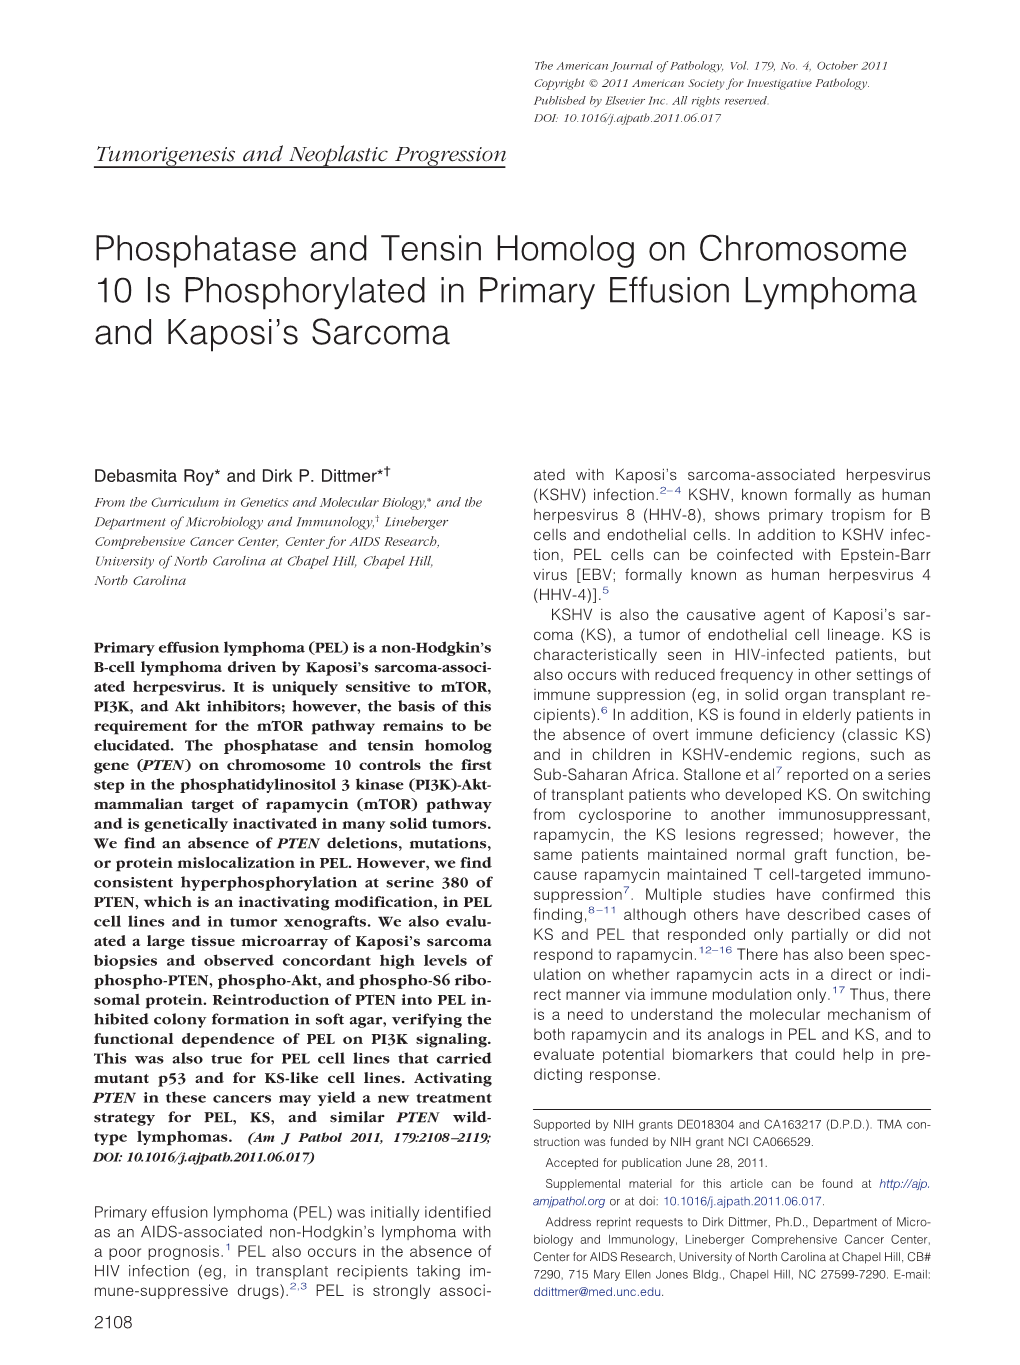 Phosphatase and Tensin Homolog on Chromosome 10 Is Phosphorylated in Primary Effusion Lymphoma and Kaposi’S Sarcoma